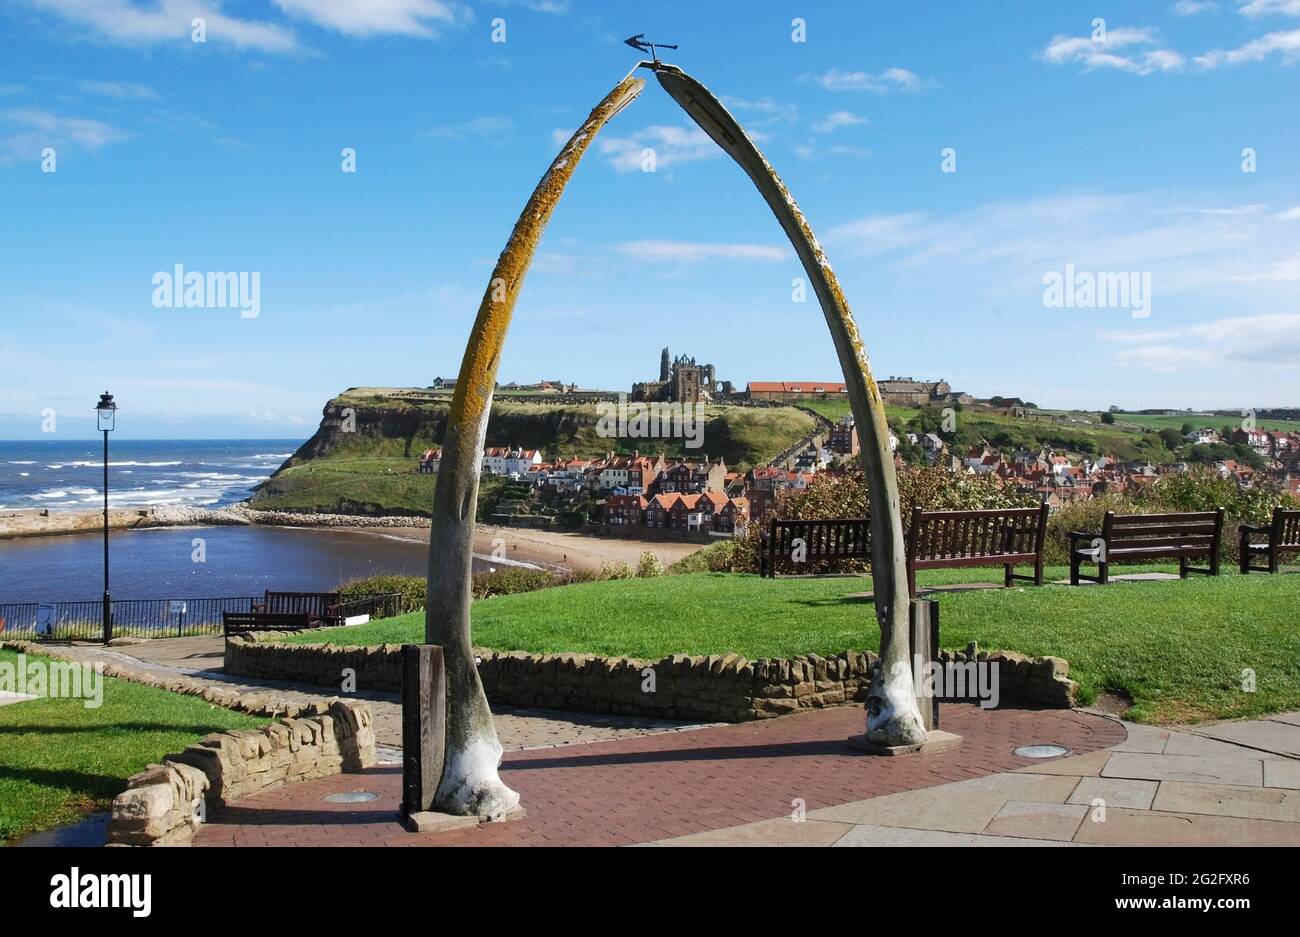 An arch made of whale jawbones at Whitby, North Yorkshire UK. The North Sea coast and Whitby Abbey are visible in the image. Stock Photo